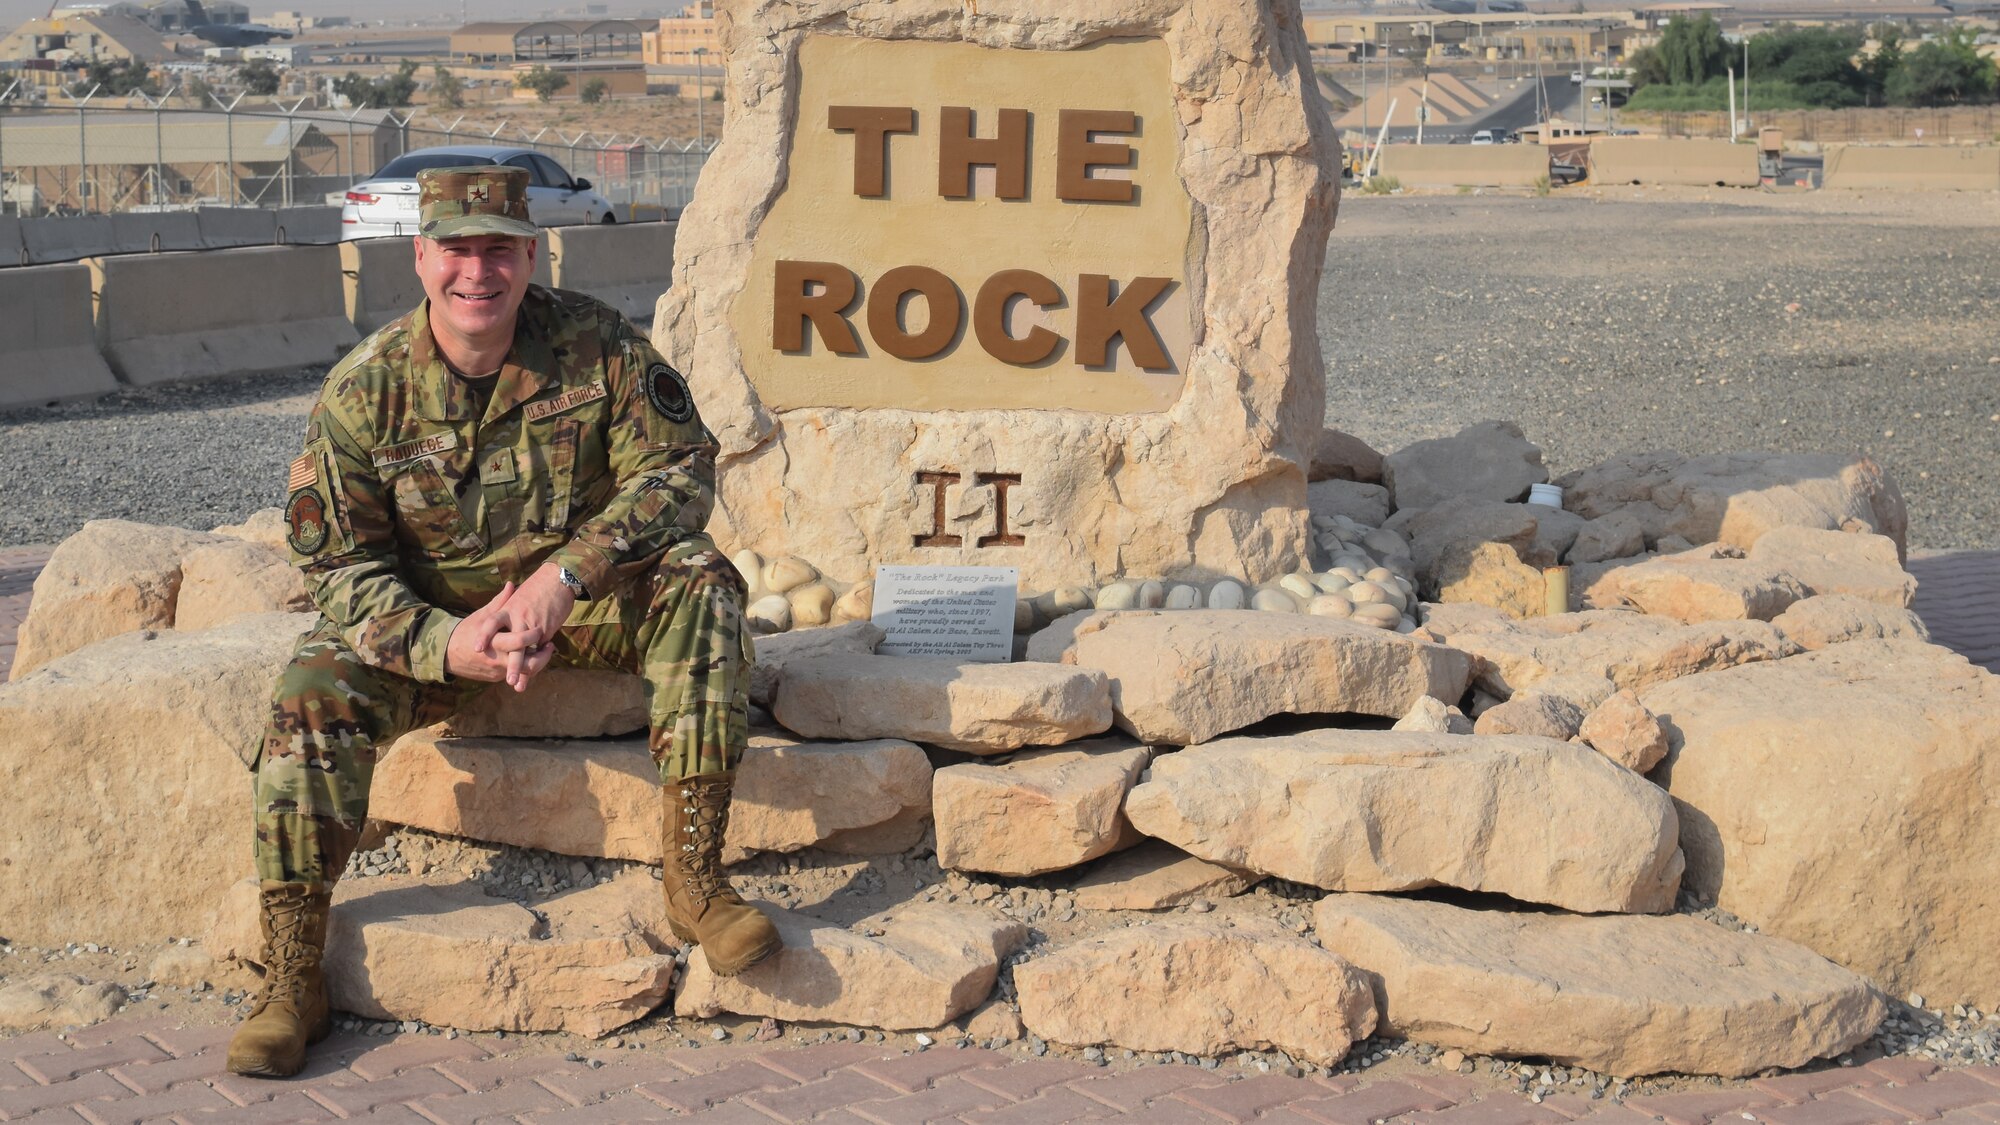 U.S. Air Force Brig. Gen. Chad Raduege, Air Combat Command director of cyberspace and information dominance, and chief information officer, takes a photo at "The Rock" on Ali Al Salem Air Base, Kuwait, Oct. 2, 2019. Raduege visited Airmen with the 386th Expeditionary Communications Squadron during a stop at ASAB enroute to the Air Forces Central Command A6 Commander's Summit at Al Udeid Air Base, Qatar. (U.S. Air Force photo by Chief Master Sgt. Joseph Hart)